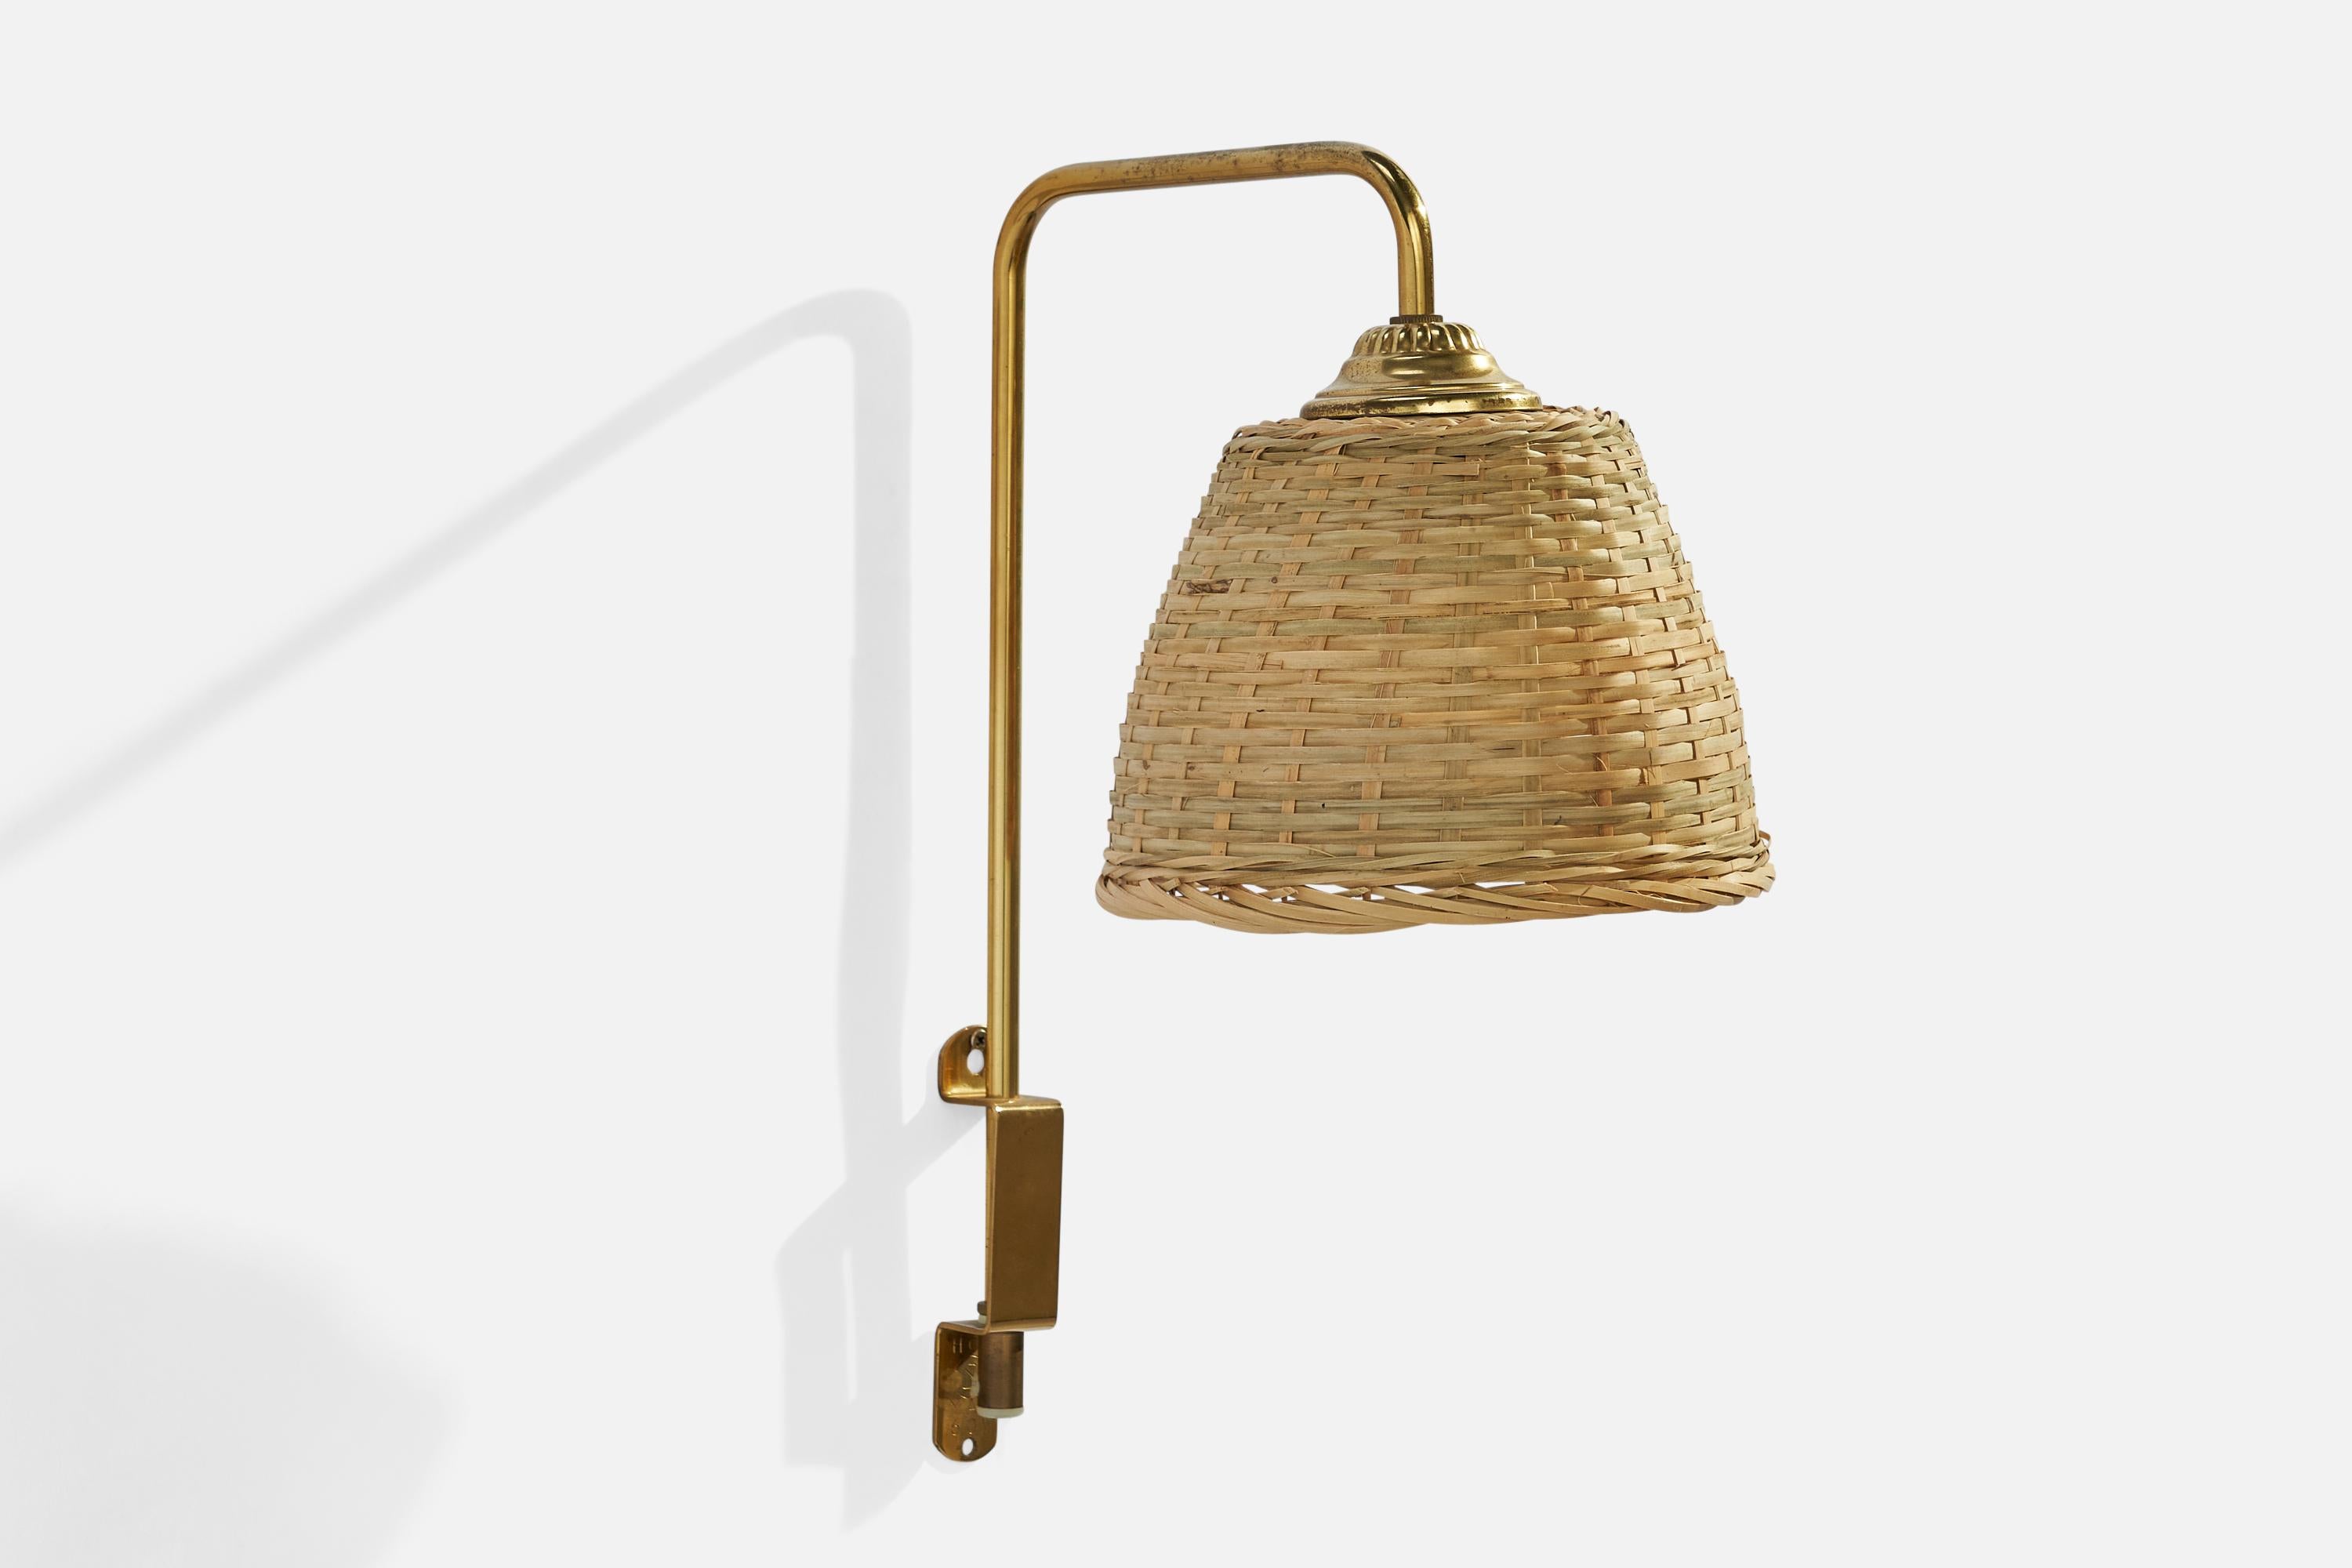 A brass and rattan wall light designed and produced in Sweden, 1960s.

Overall Dimensions (inches): 14.5”  H x 7.0” W x 10.50” D
Back Plate Dimensions (inches): 5” H x 1” W x .25”  D
Bulb Specifications: E-26 Bulb
Number of Sockets: 1
All lighting